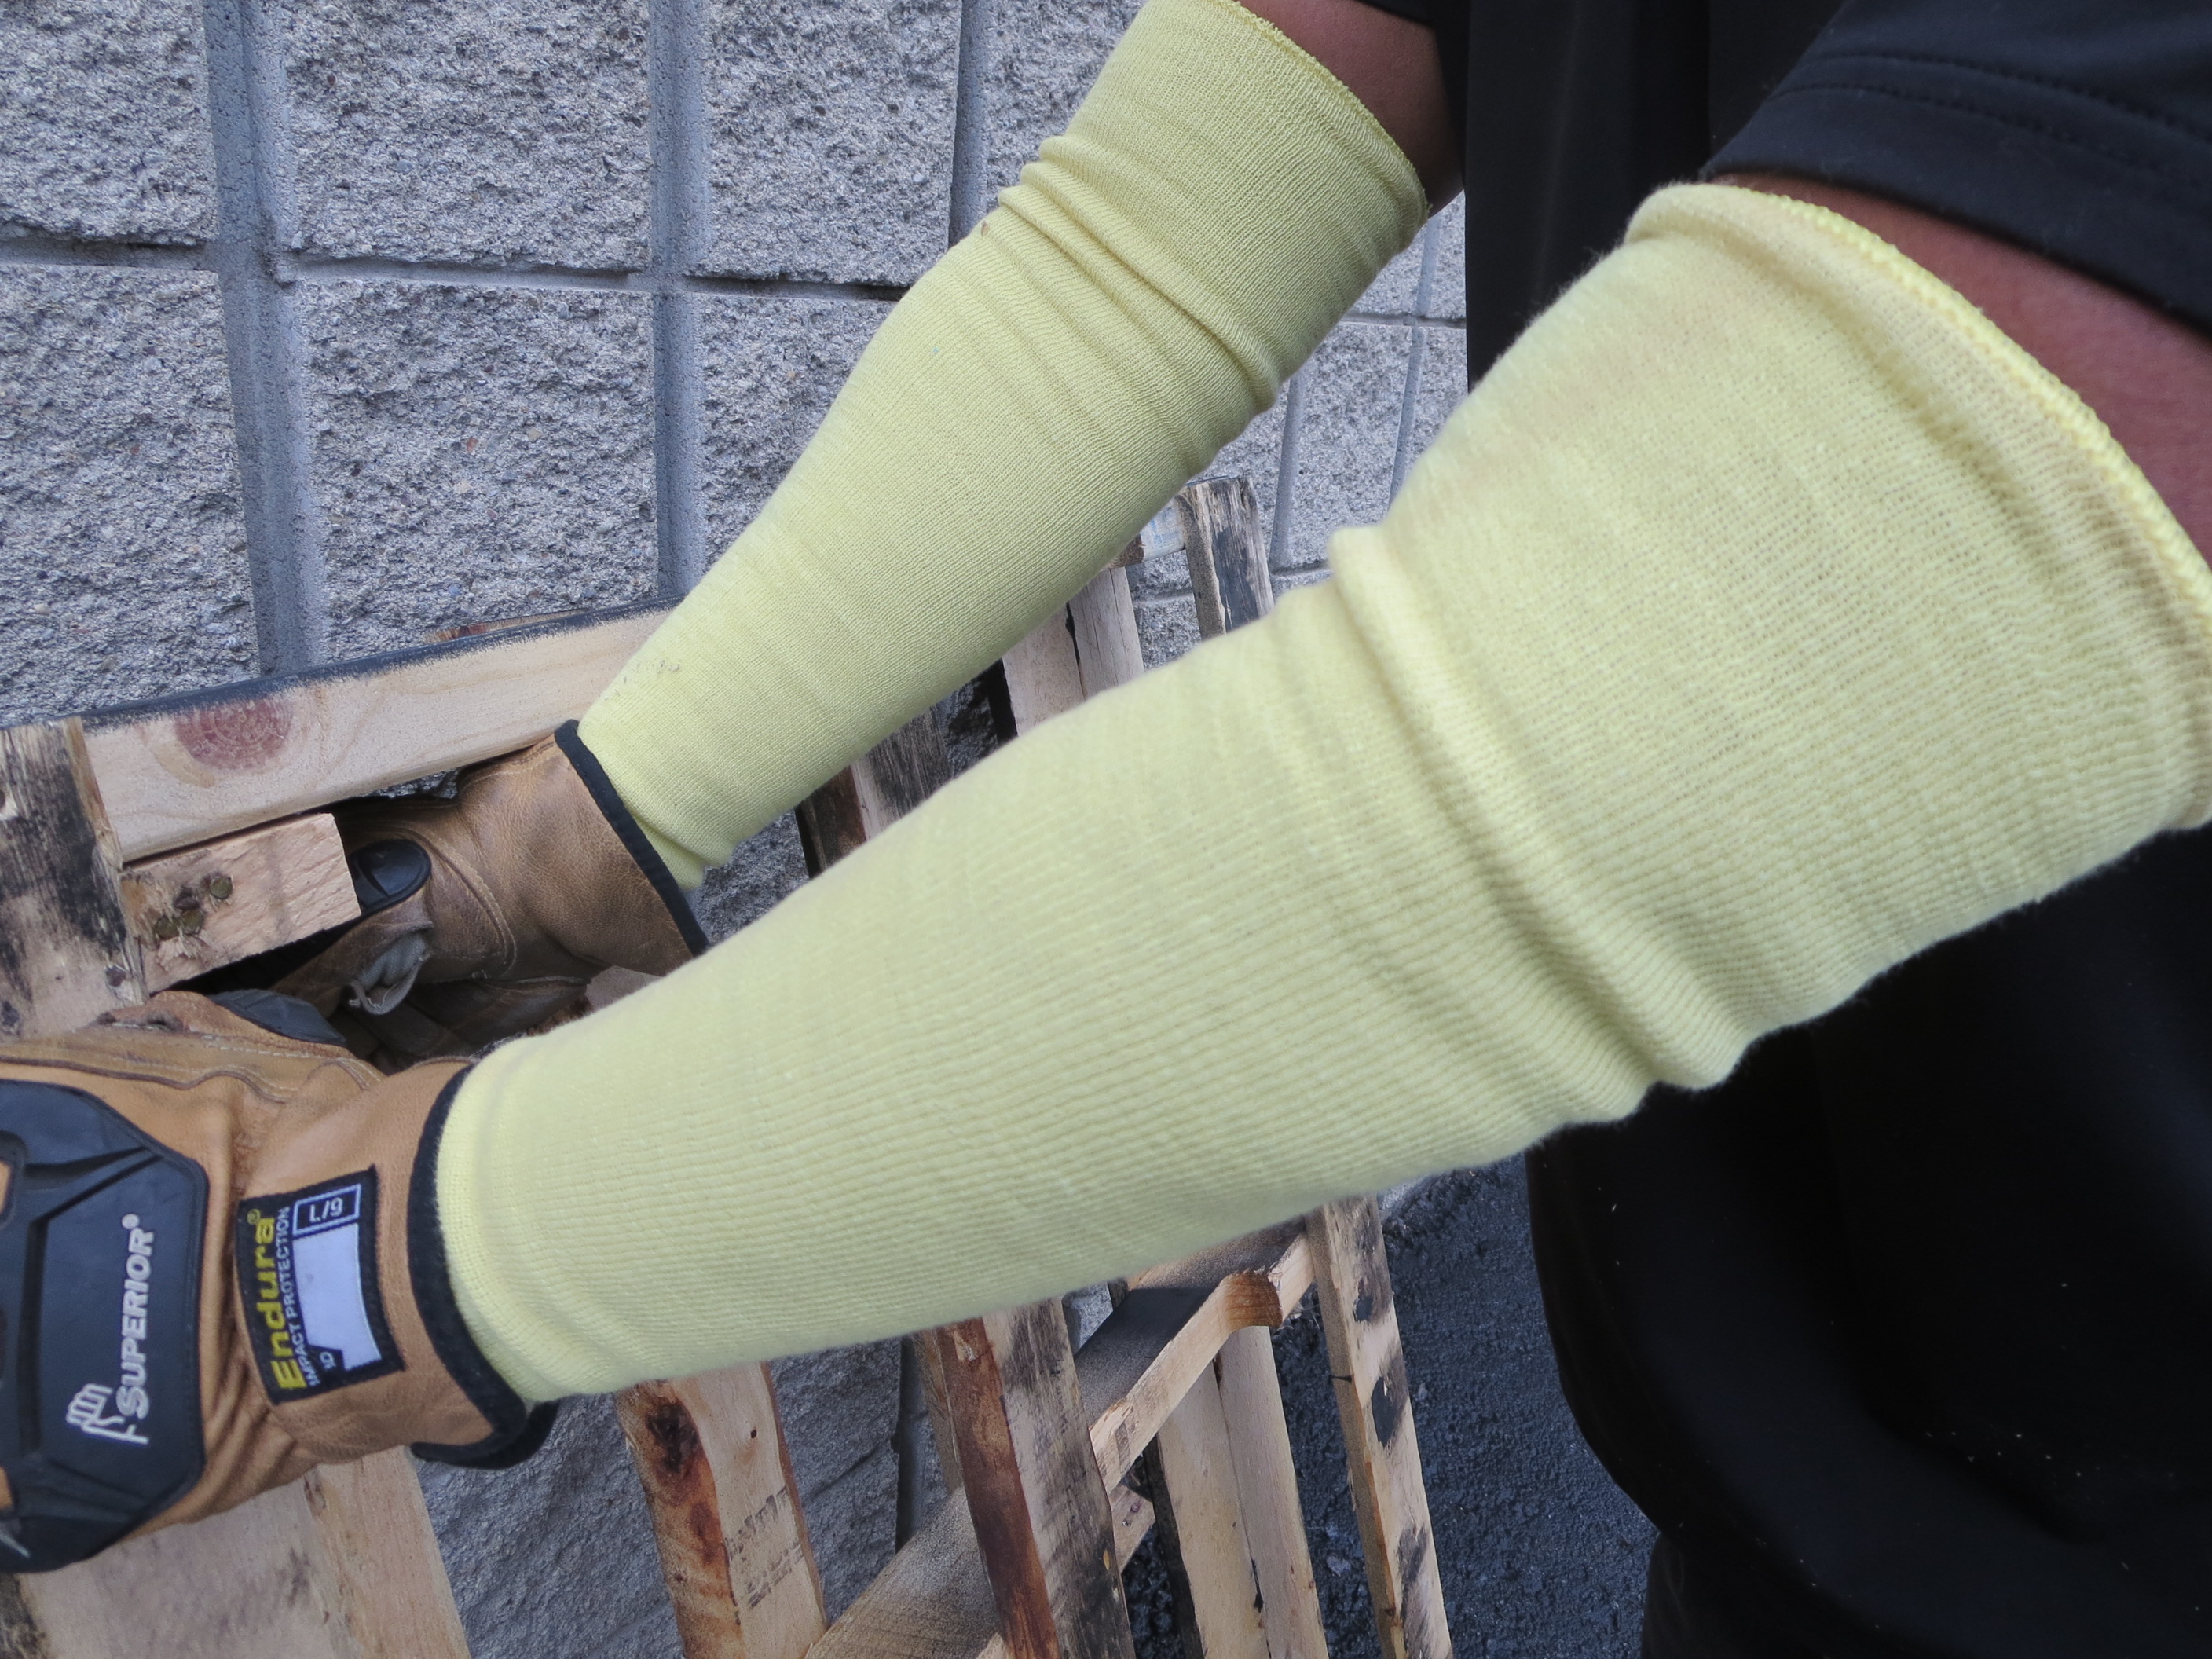 Personal Protective Equipment - Hand and Arm Protection